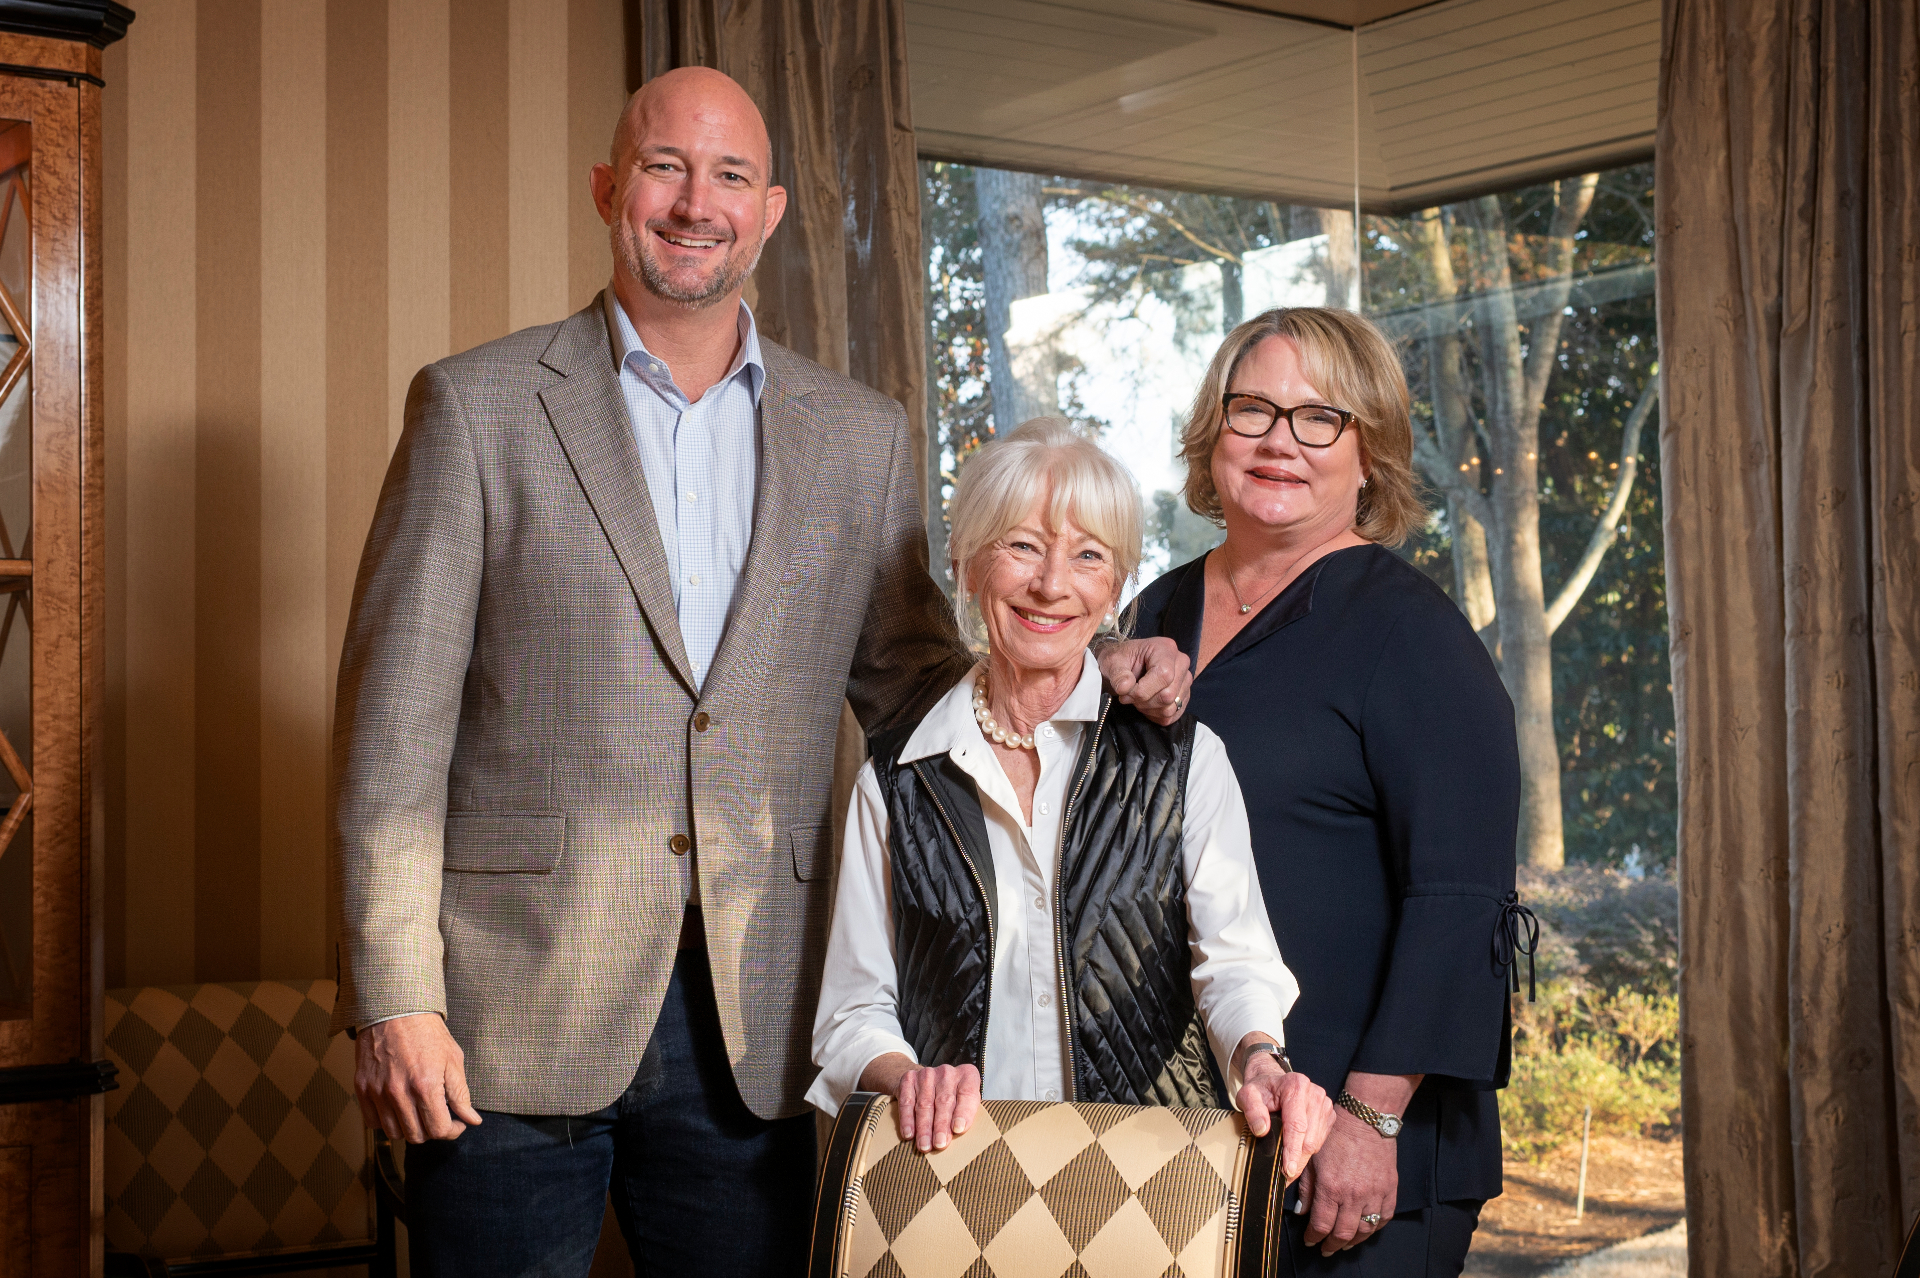 Marge Schueck (center) and her children, Patrick Schueck and Jennifer Schueck McCarty. The family is passionate about UAMS achieving NCI Designation and sees their gift as having an immediate impact toward reaching that goal.